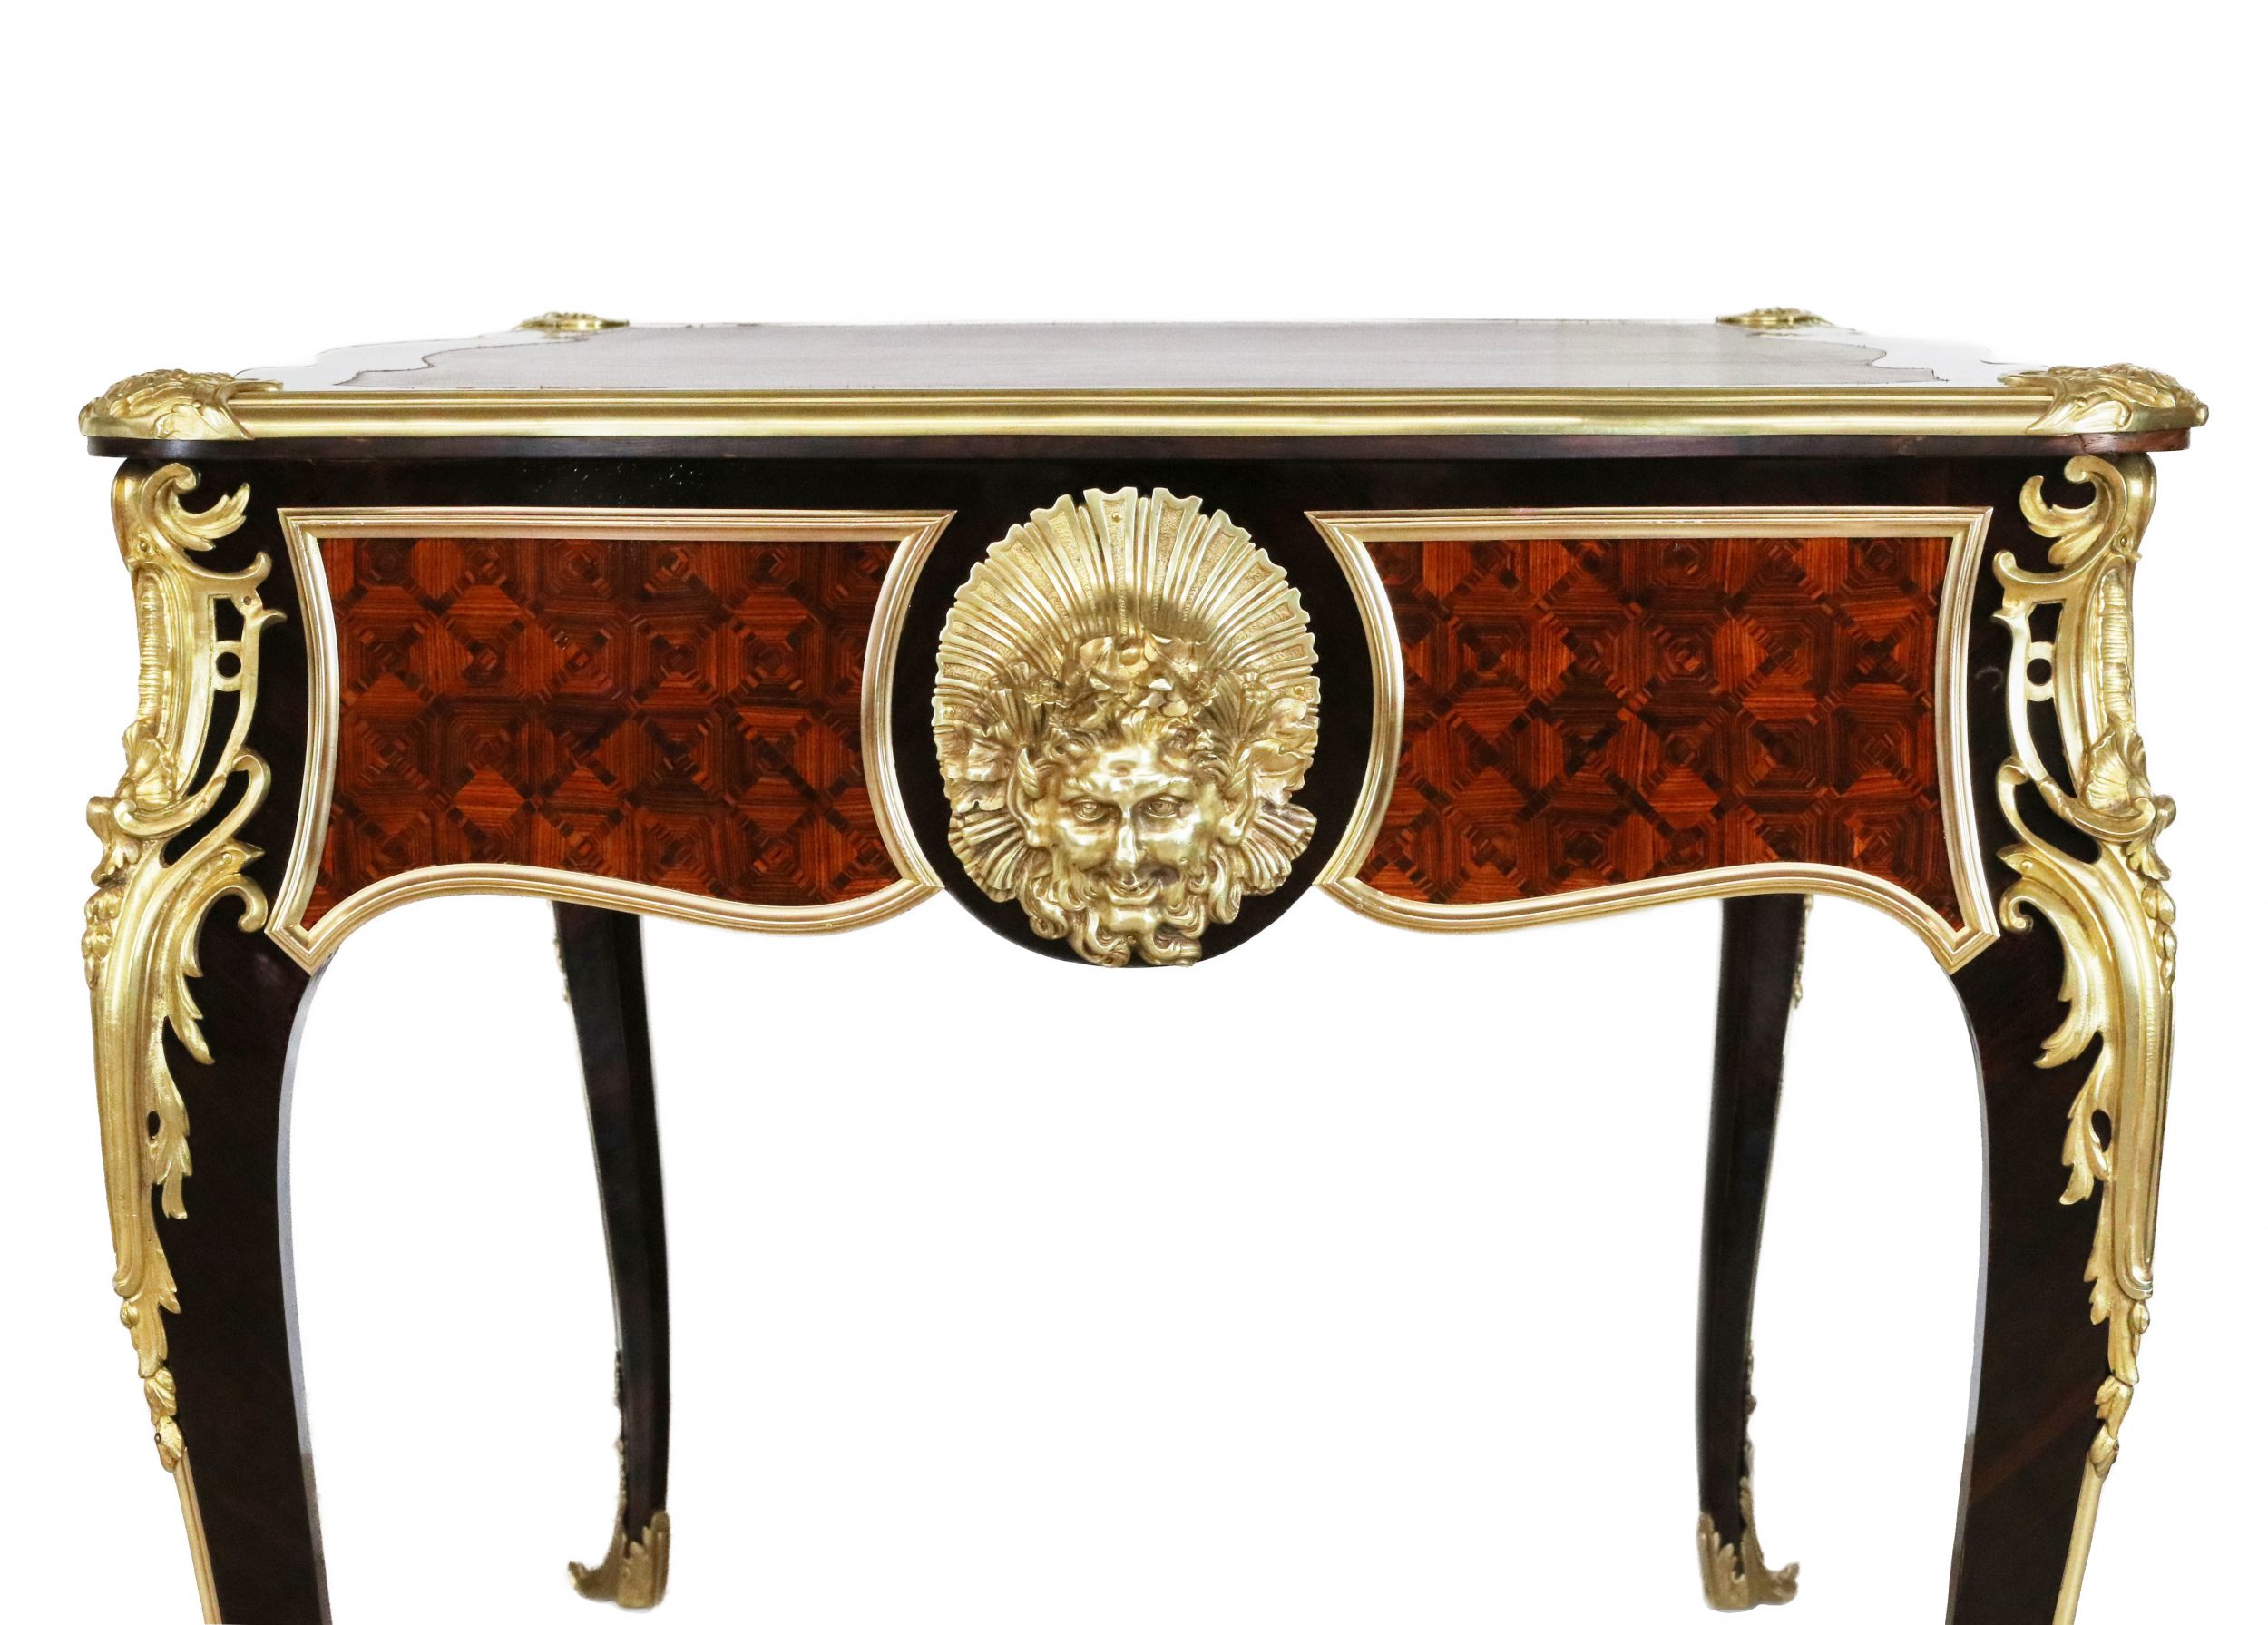 Magnificent writing desk in wood and gilded bronze, Louis XV style. - Image 7 of 8